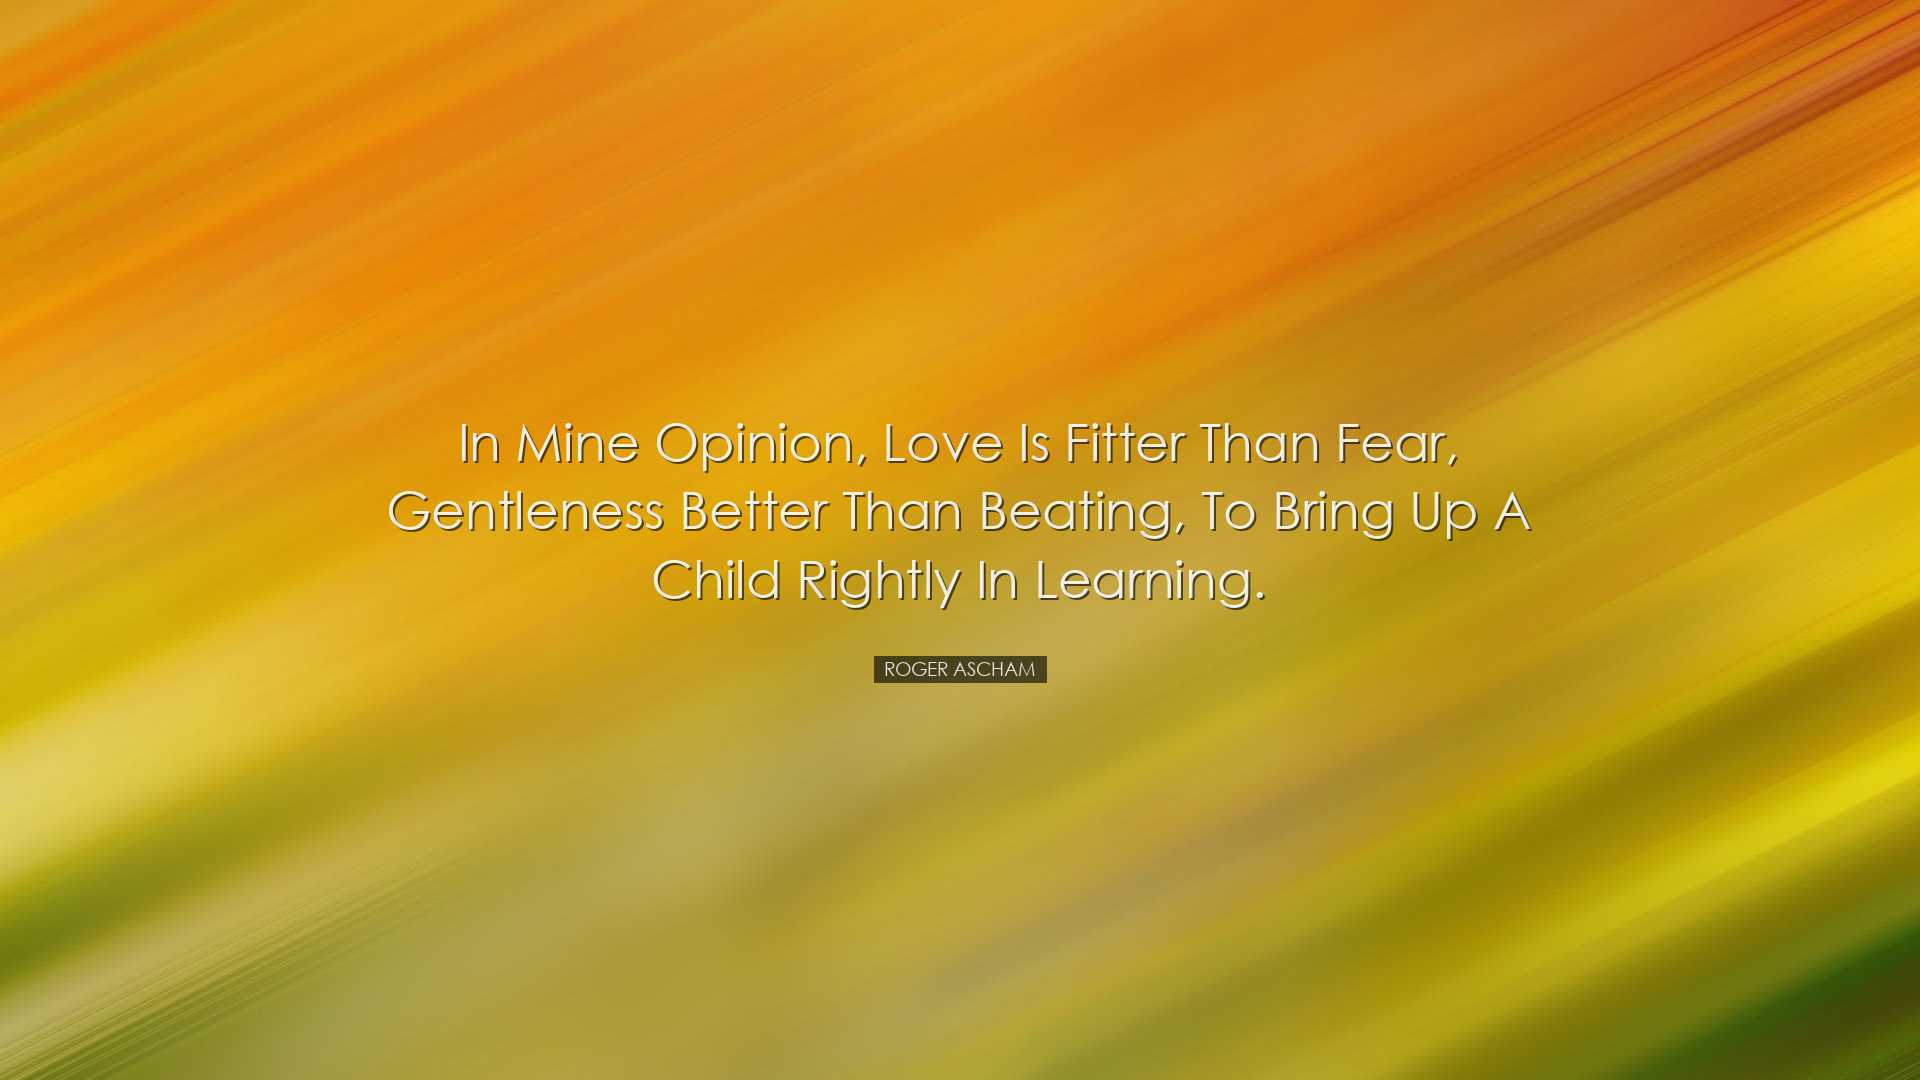 In mine opinion, love is fitter than fear, gentleness better than